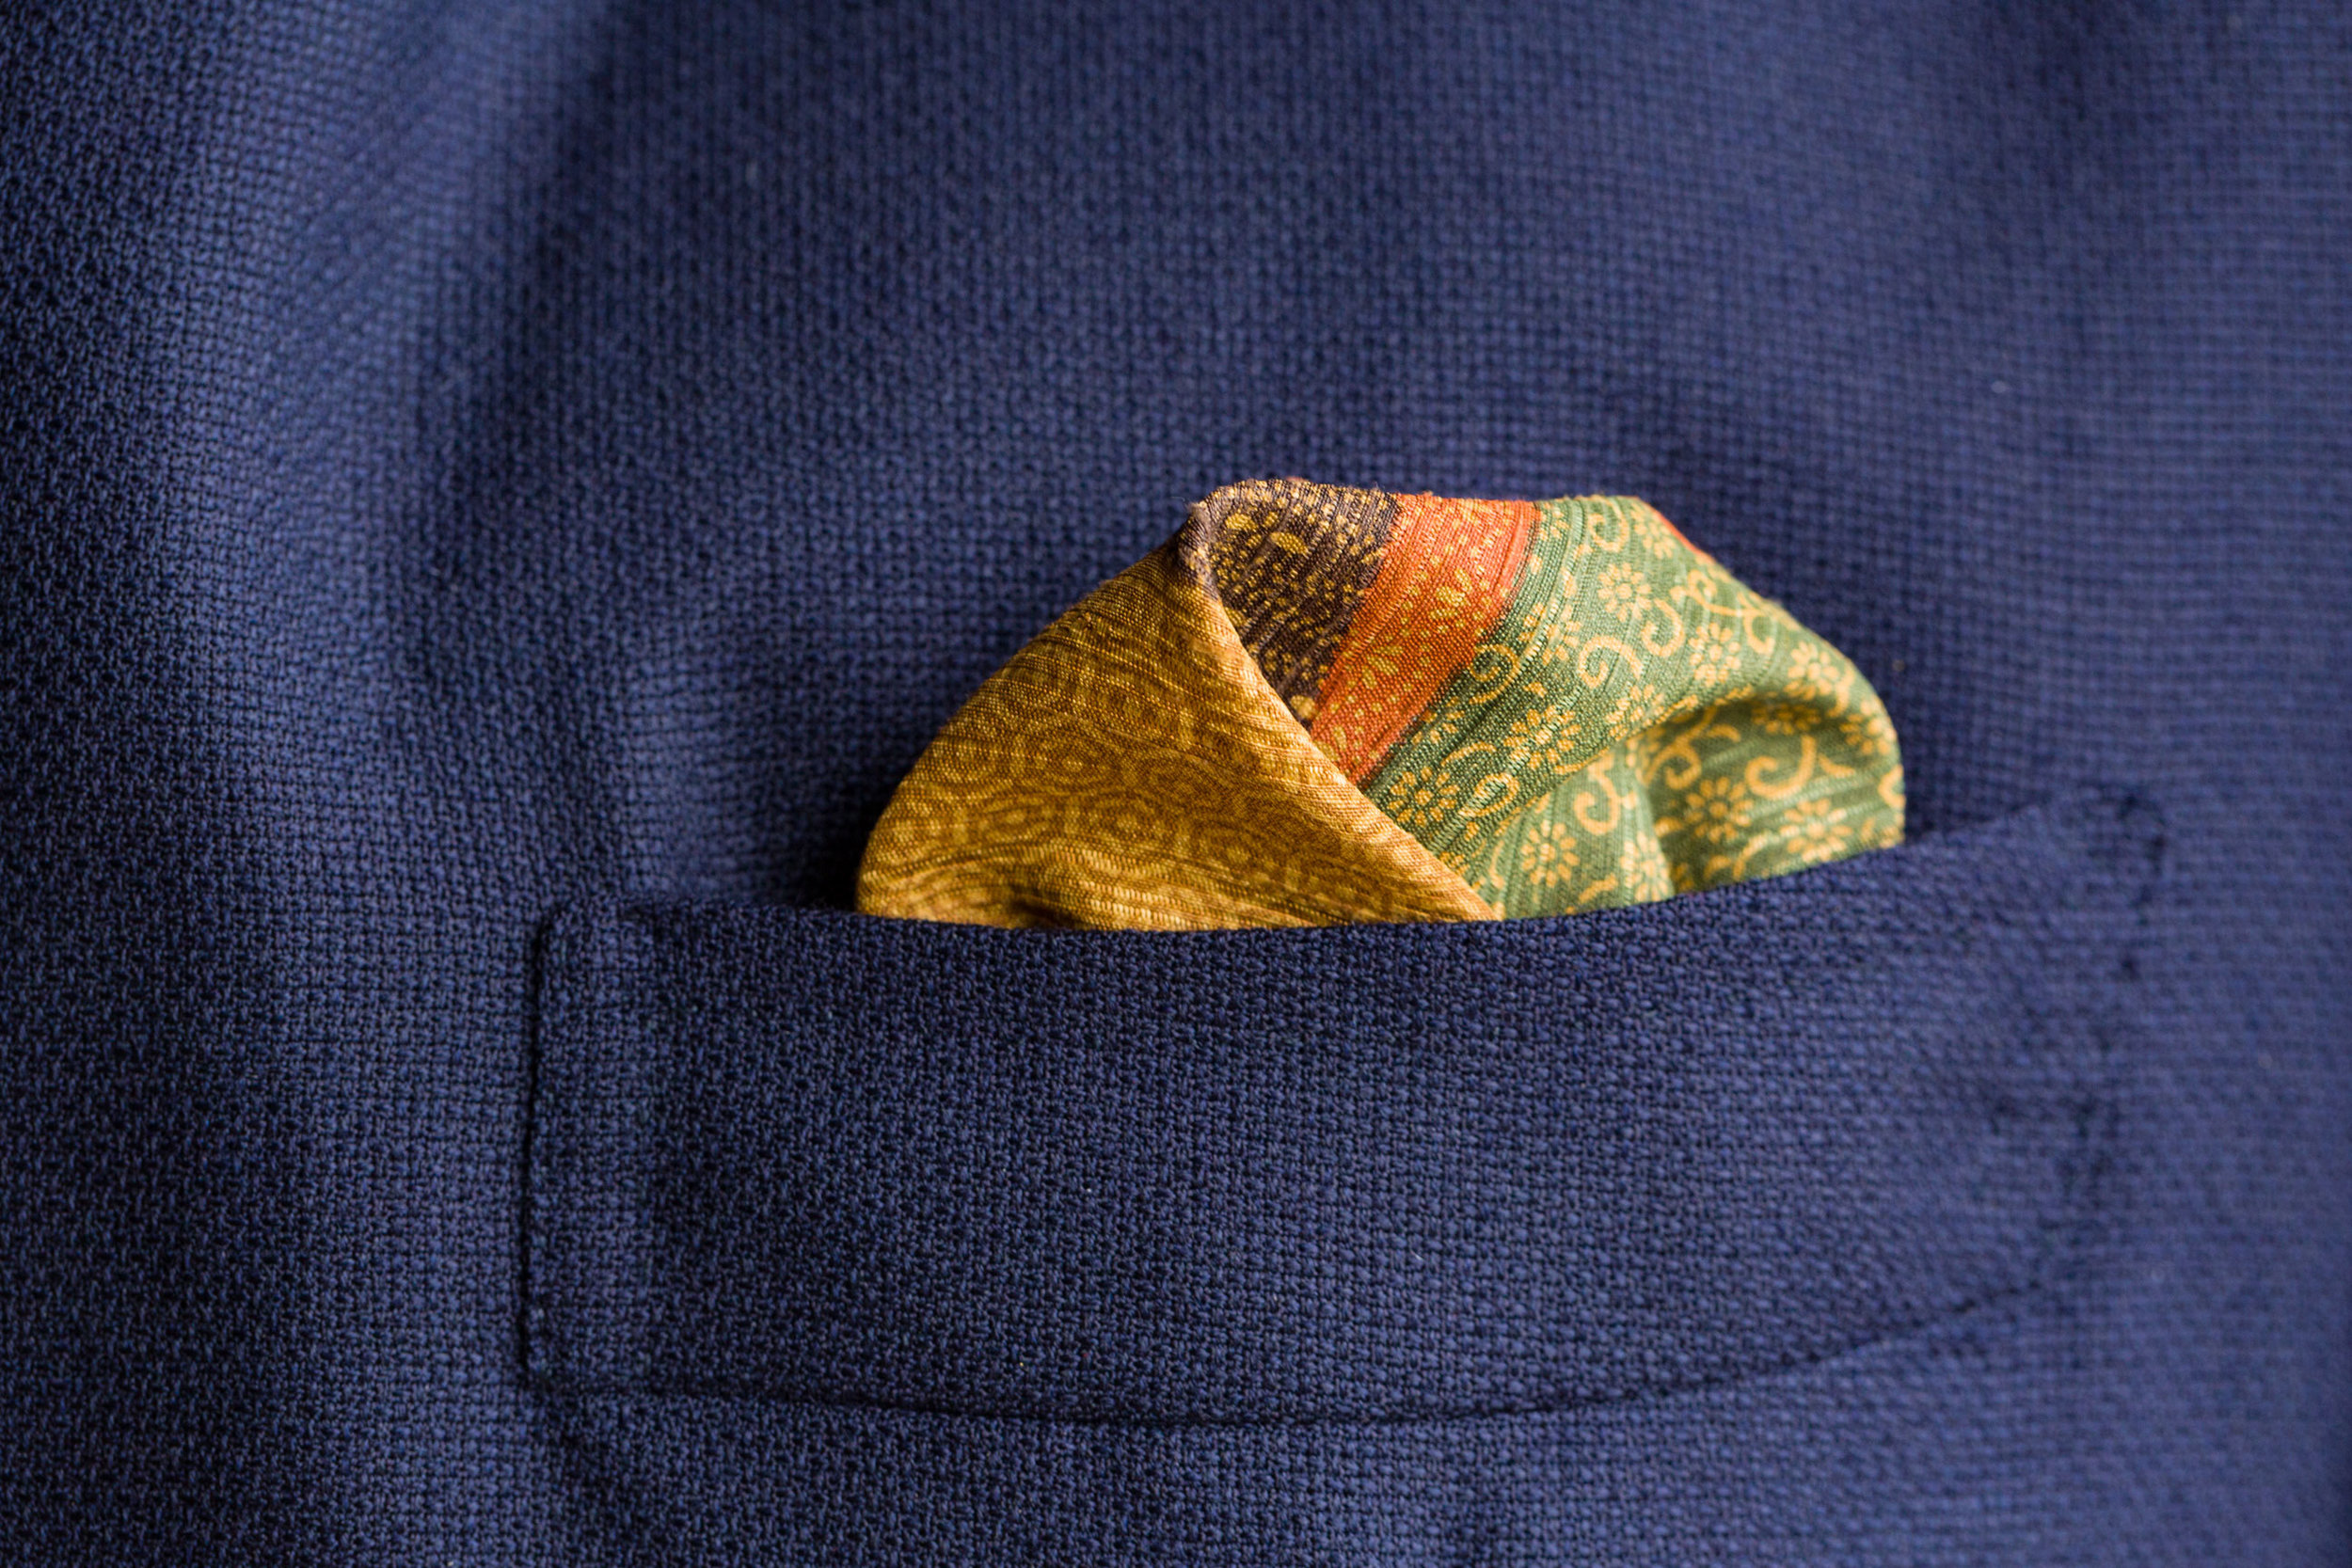 Olive, Green and Gold Pocket Square